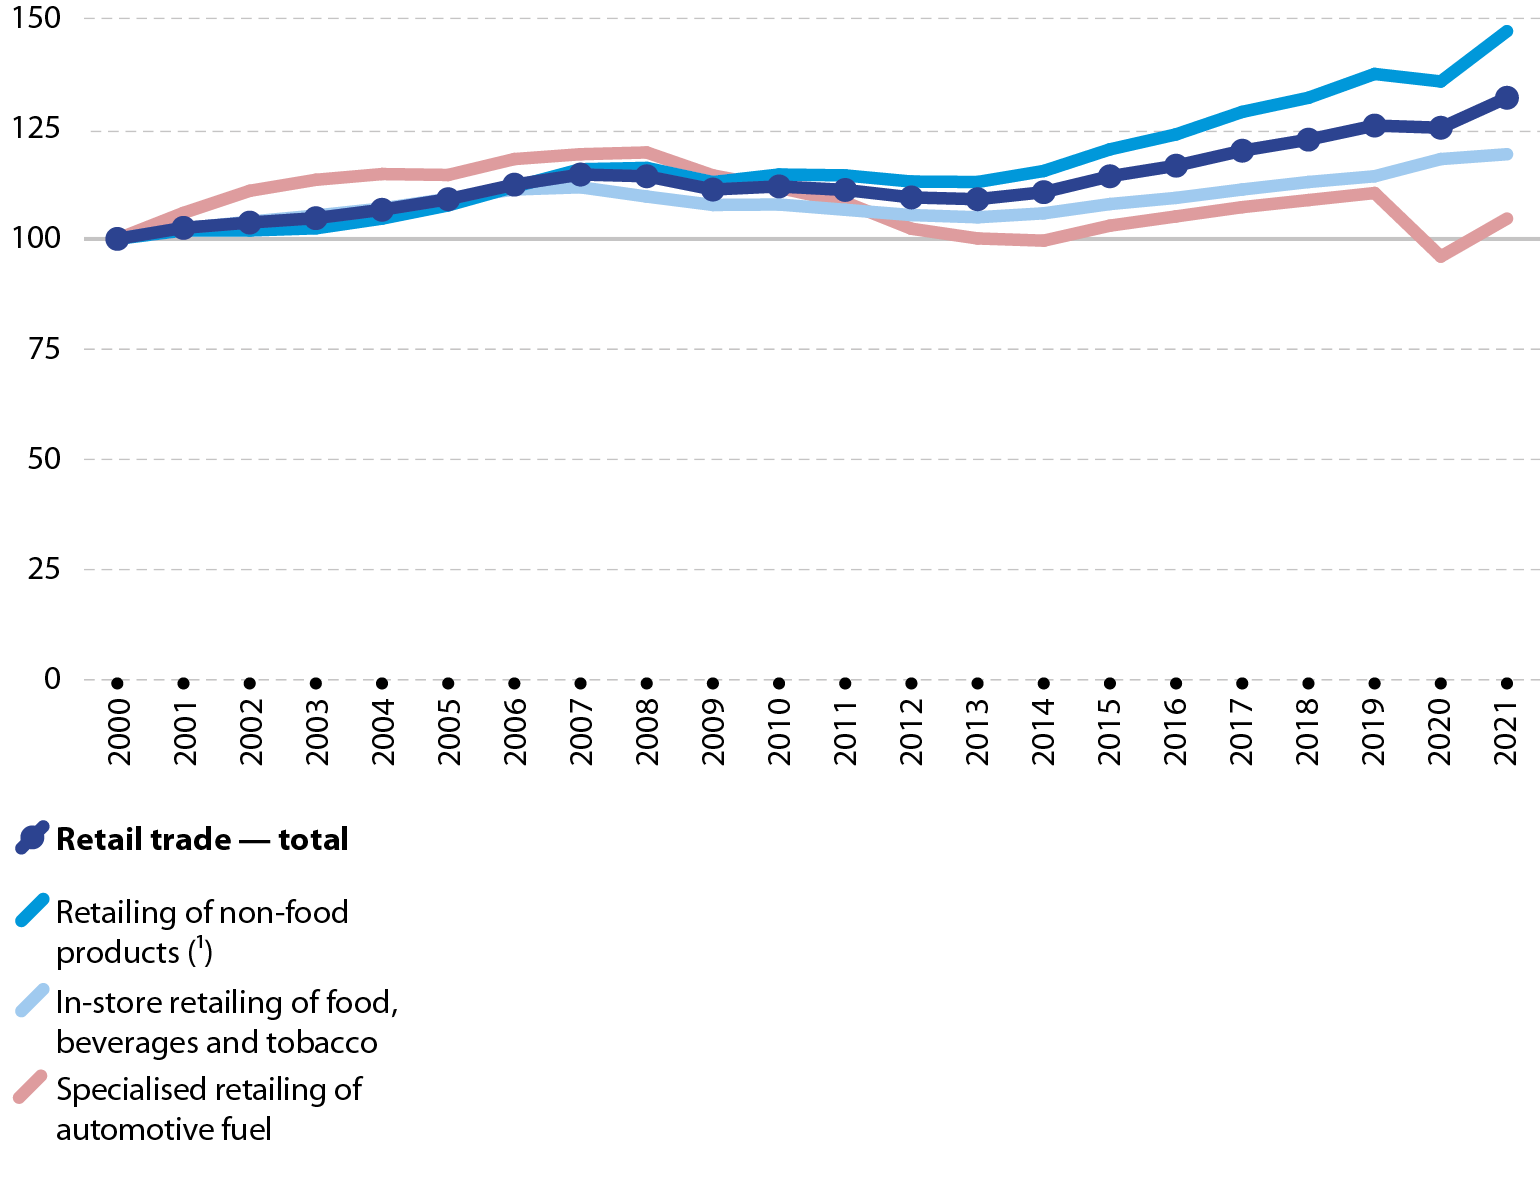 Valume of sales index. Data for the EU. Annual data for 2000 to 2021. Retail trade, in-store food retail, non-food retail and specialised automotive fuel retailing. Line graph.